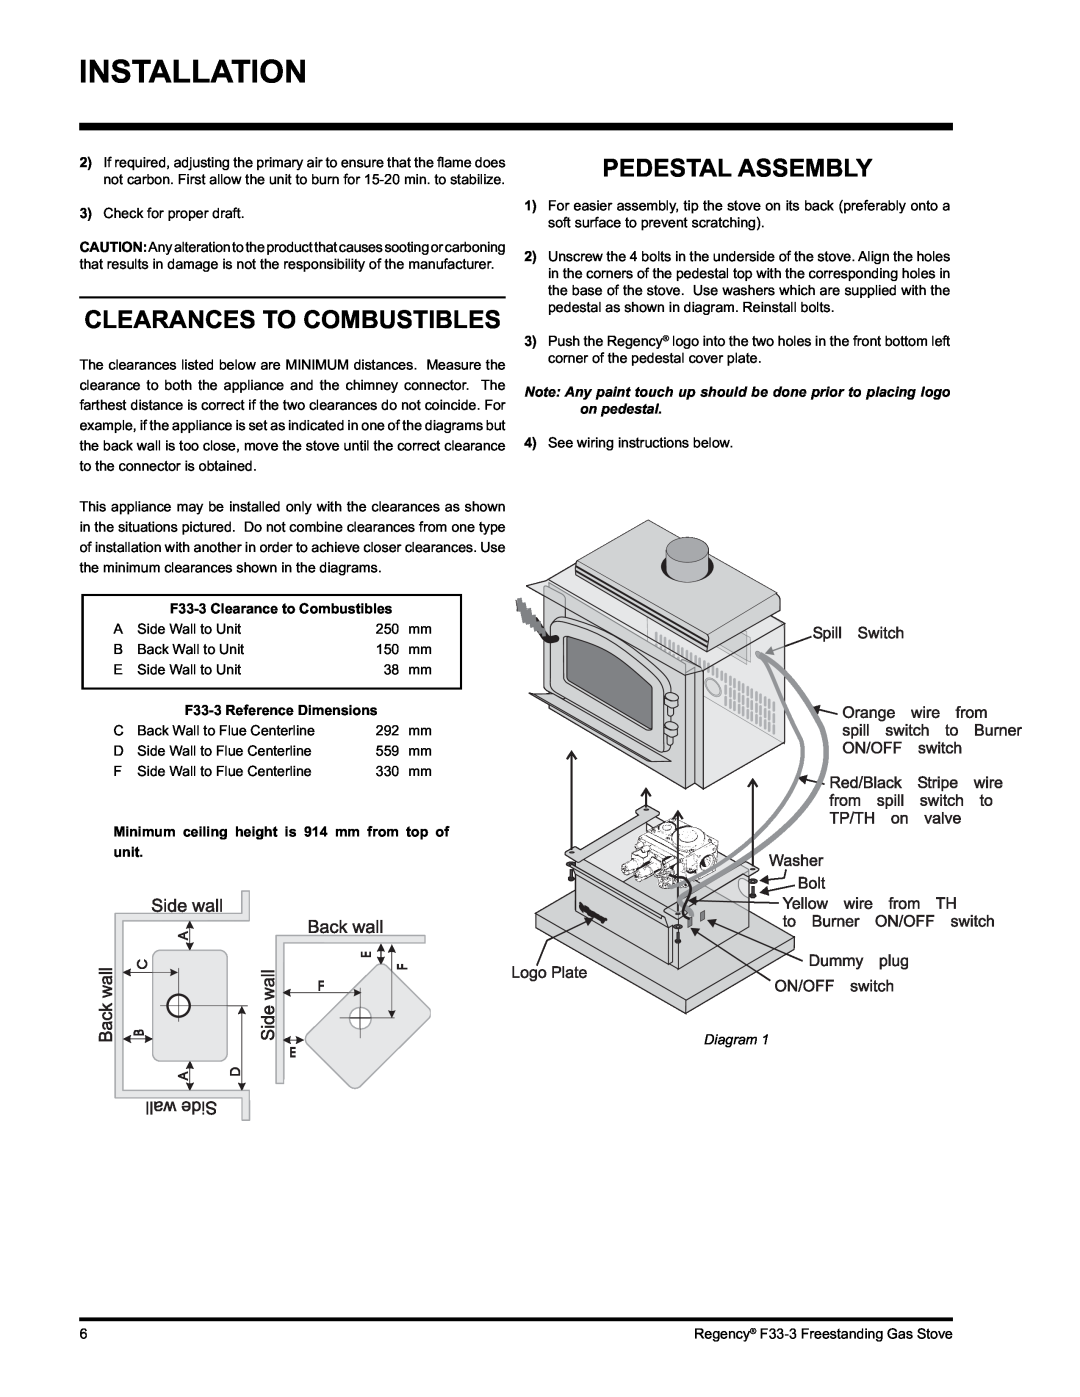 Regency Wraps Clearances To Combustibles, Pedestal Assembly, Installation, F33-3Reference Dimensions, Diagram 